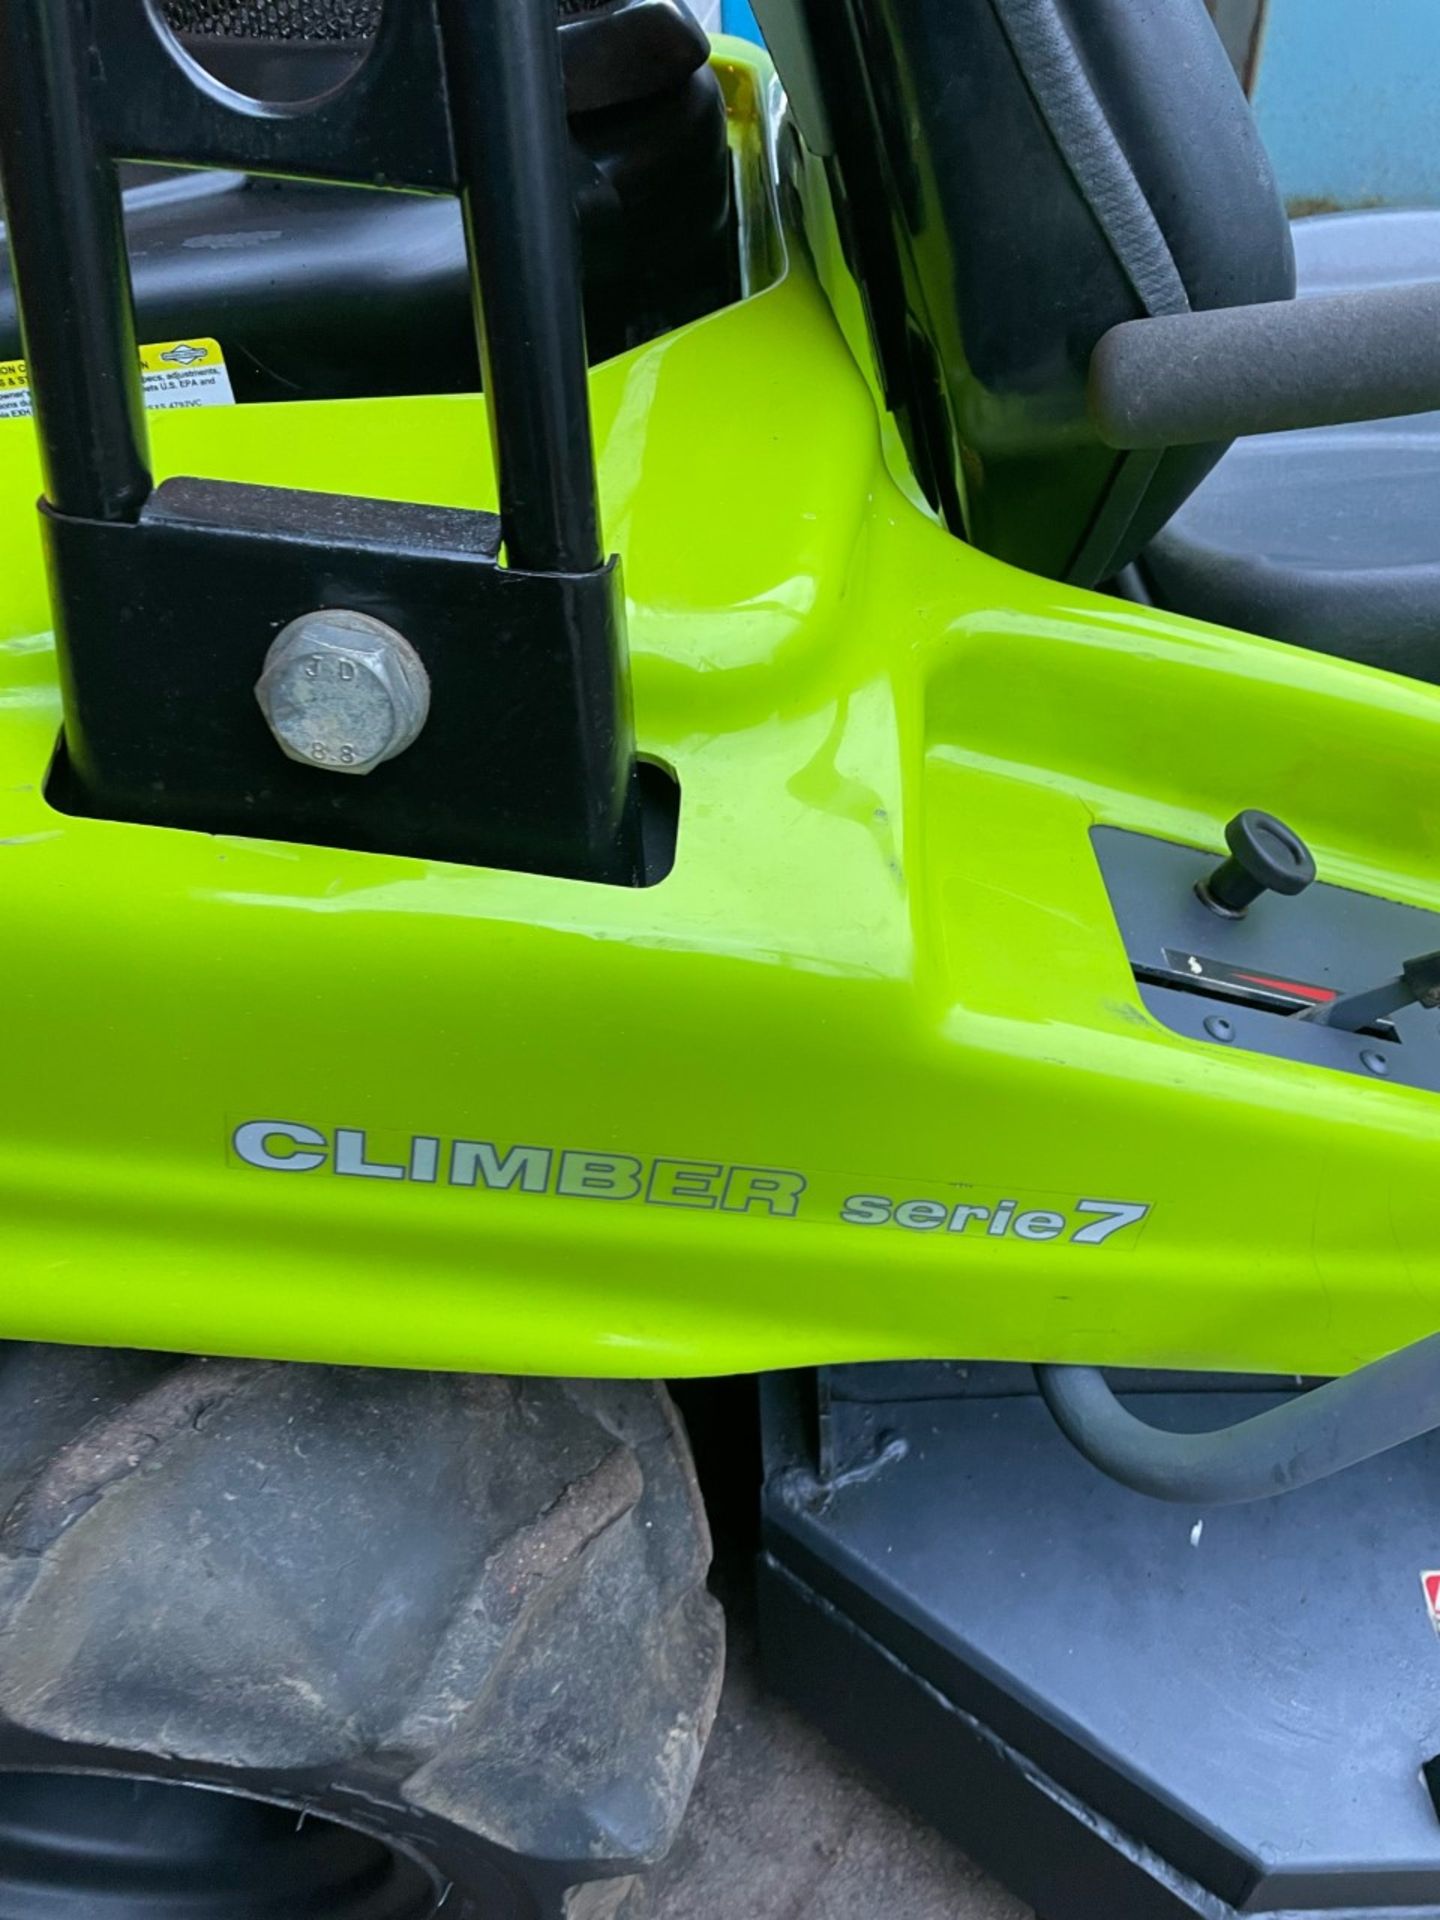 grillo climber series 7 in very good condition full working order climb any bank you will sit on - Image 3 of 4